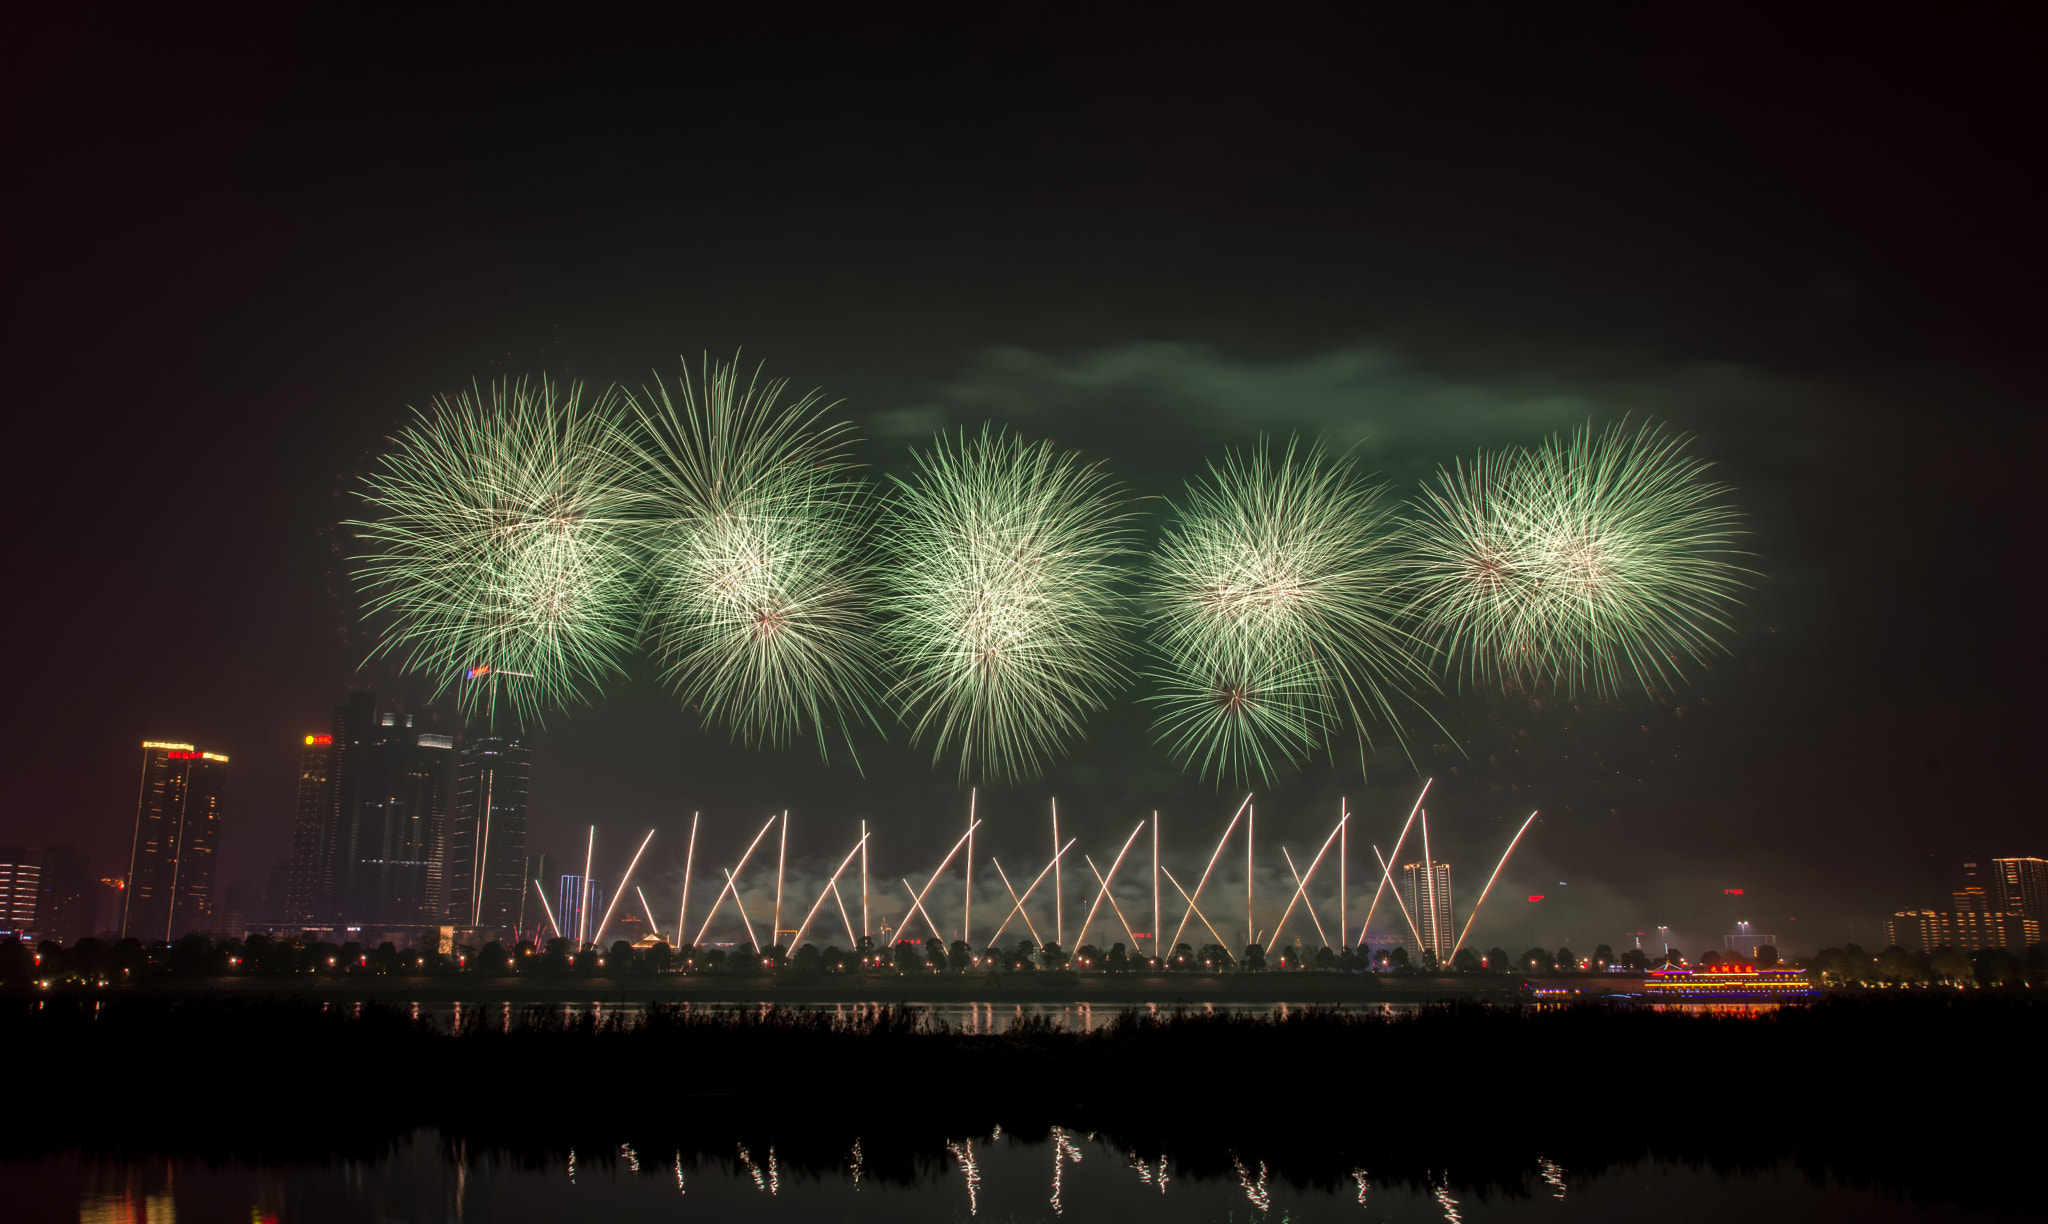 Nikon D7200 + Tamron SP AF 10-24mm F3.5-4.5 Di II LD Aspherical (IF) sample photo. New year fireworks show photography